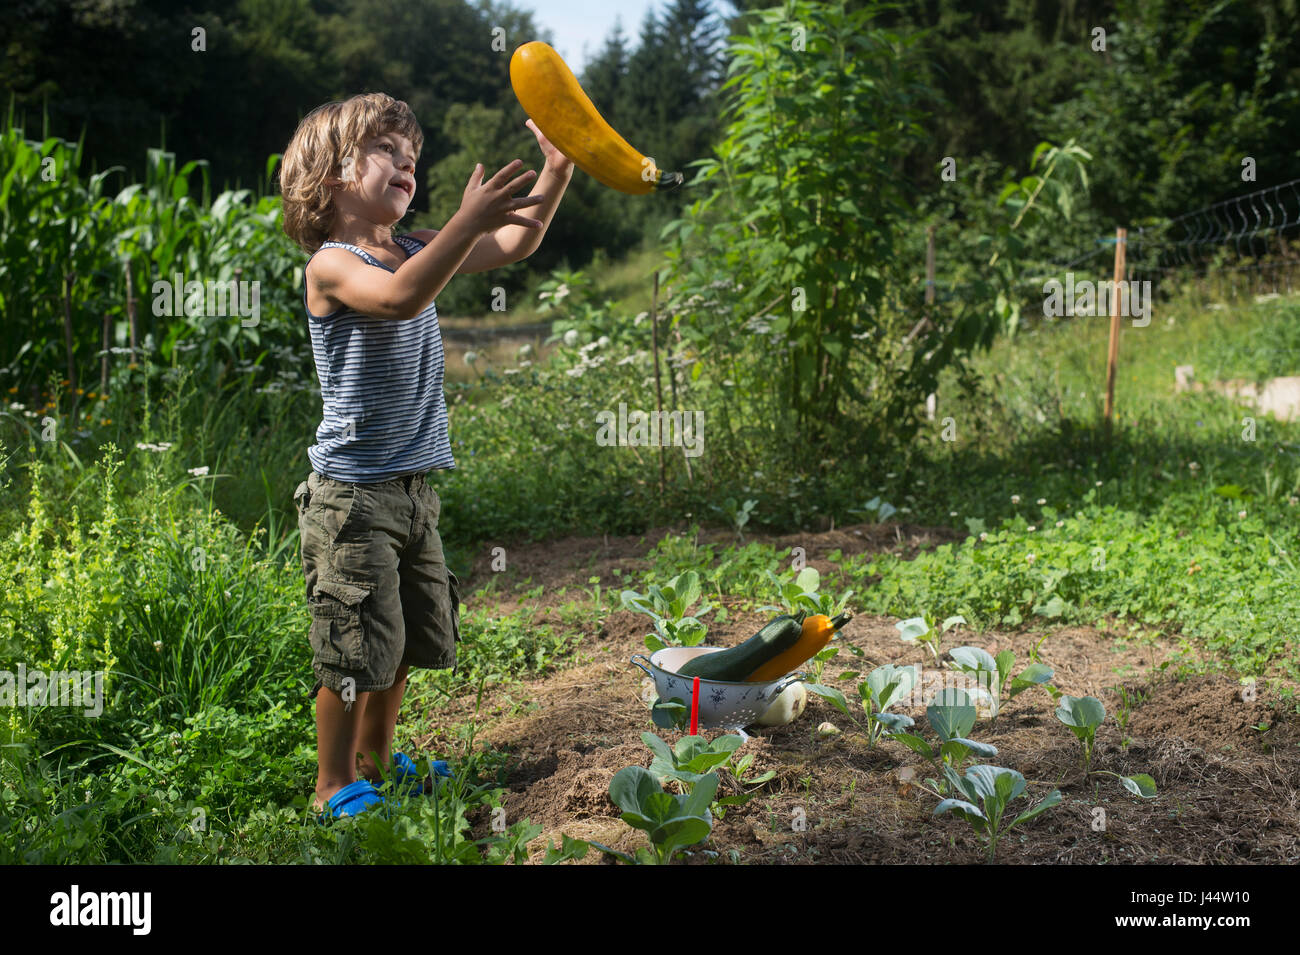 Cute little boy playing with big yellow zucchini il cueillies dans un jardin. Banque D'Images